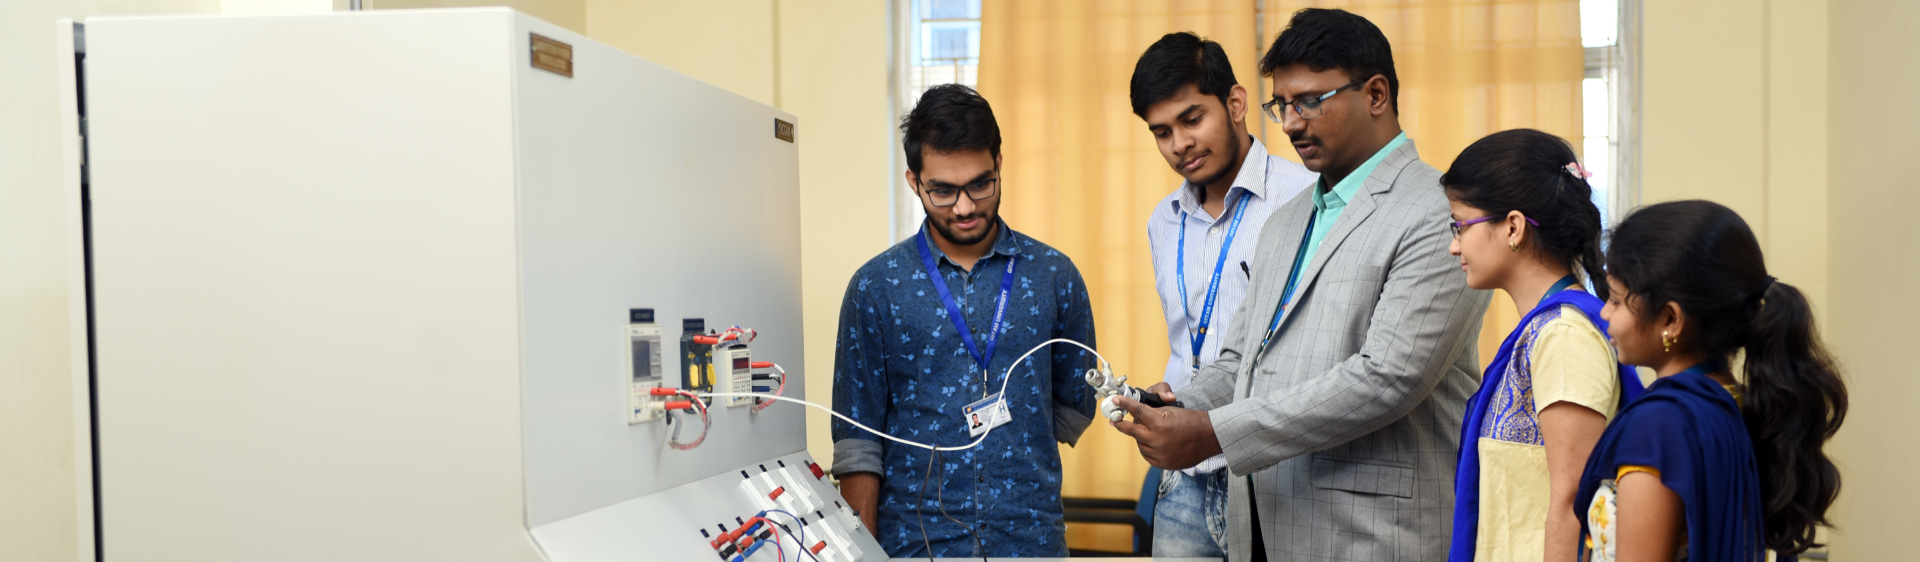 BLRGIT - Department of Electrical, Electronics and Communication Engineering